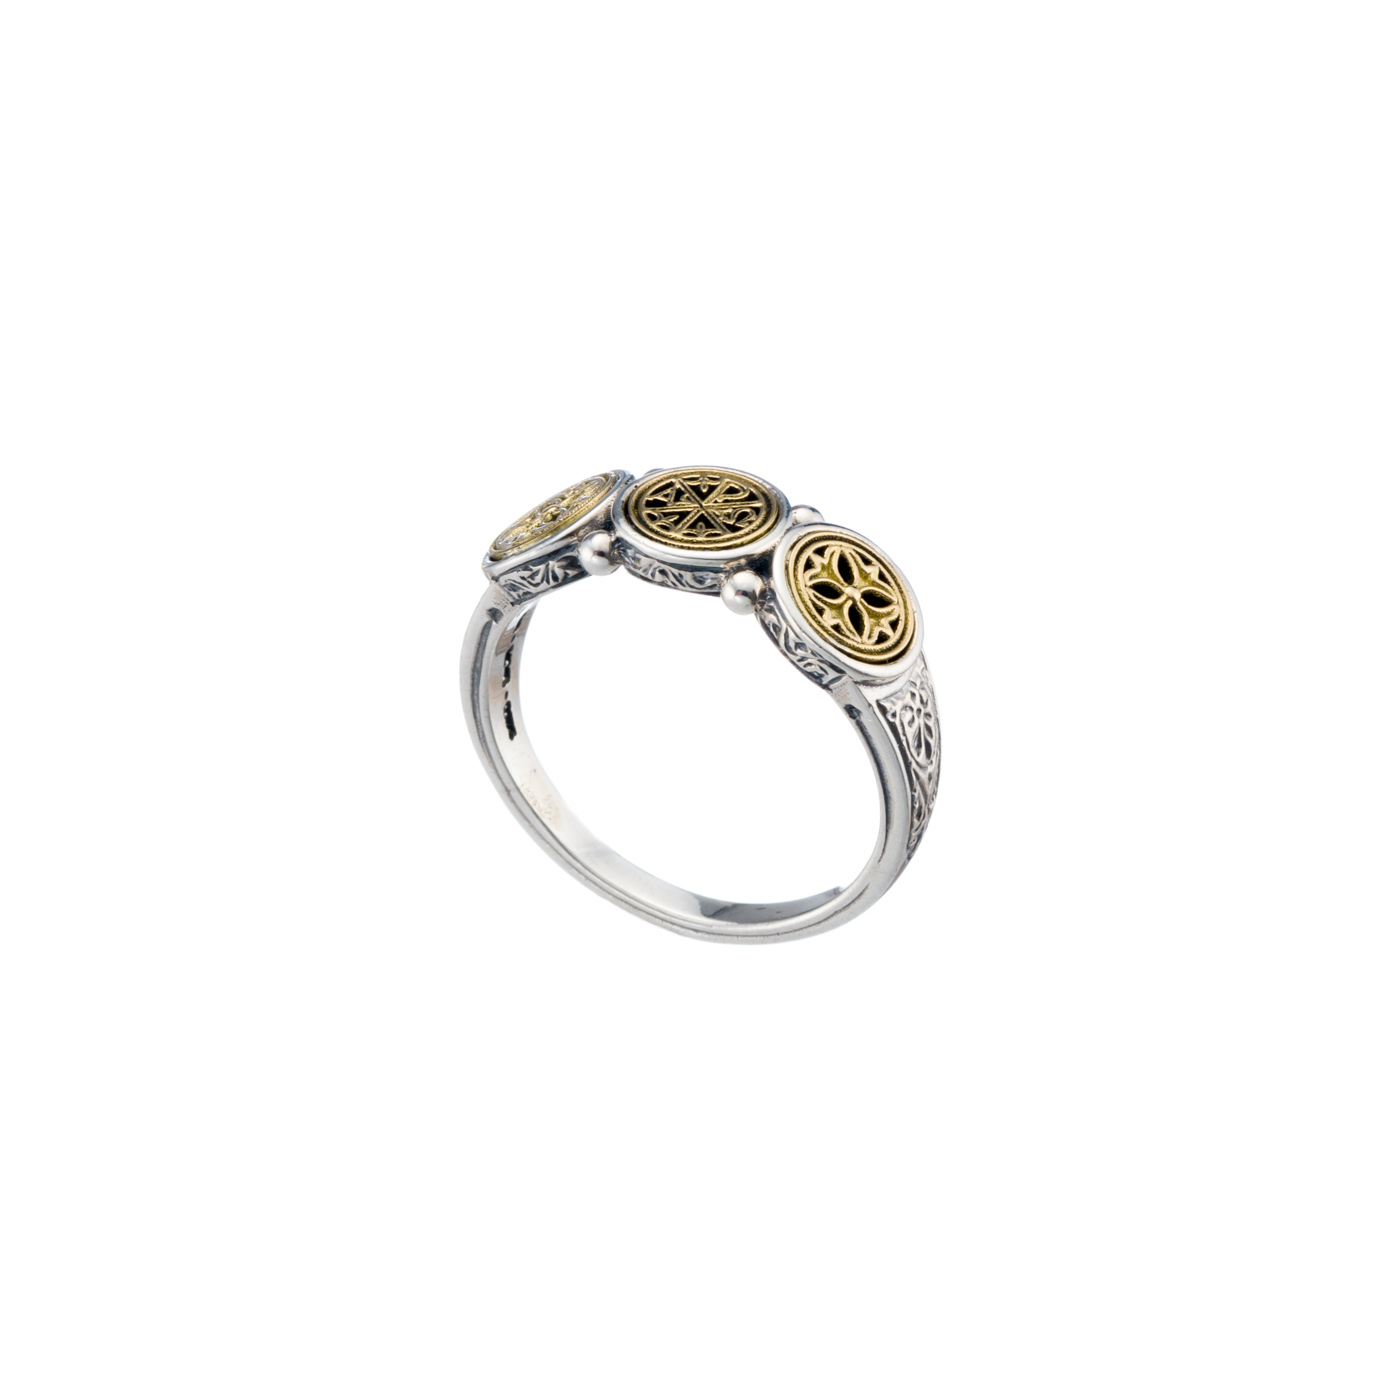 Symbol AΩ ring in 18K Gold and Sterling silver